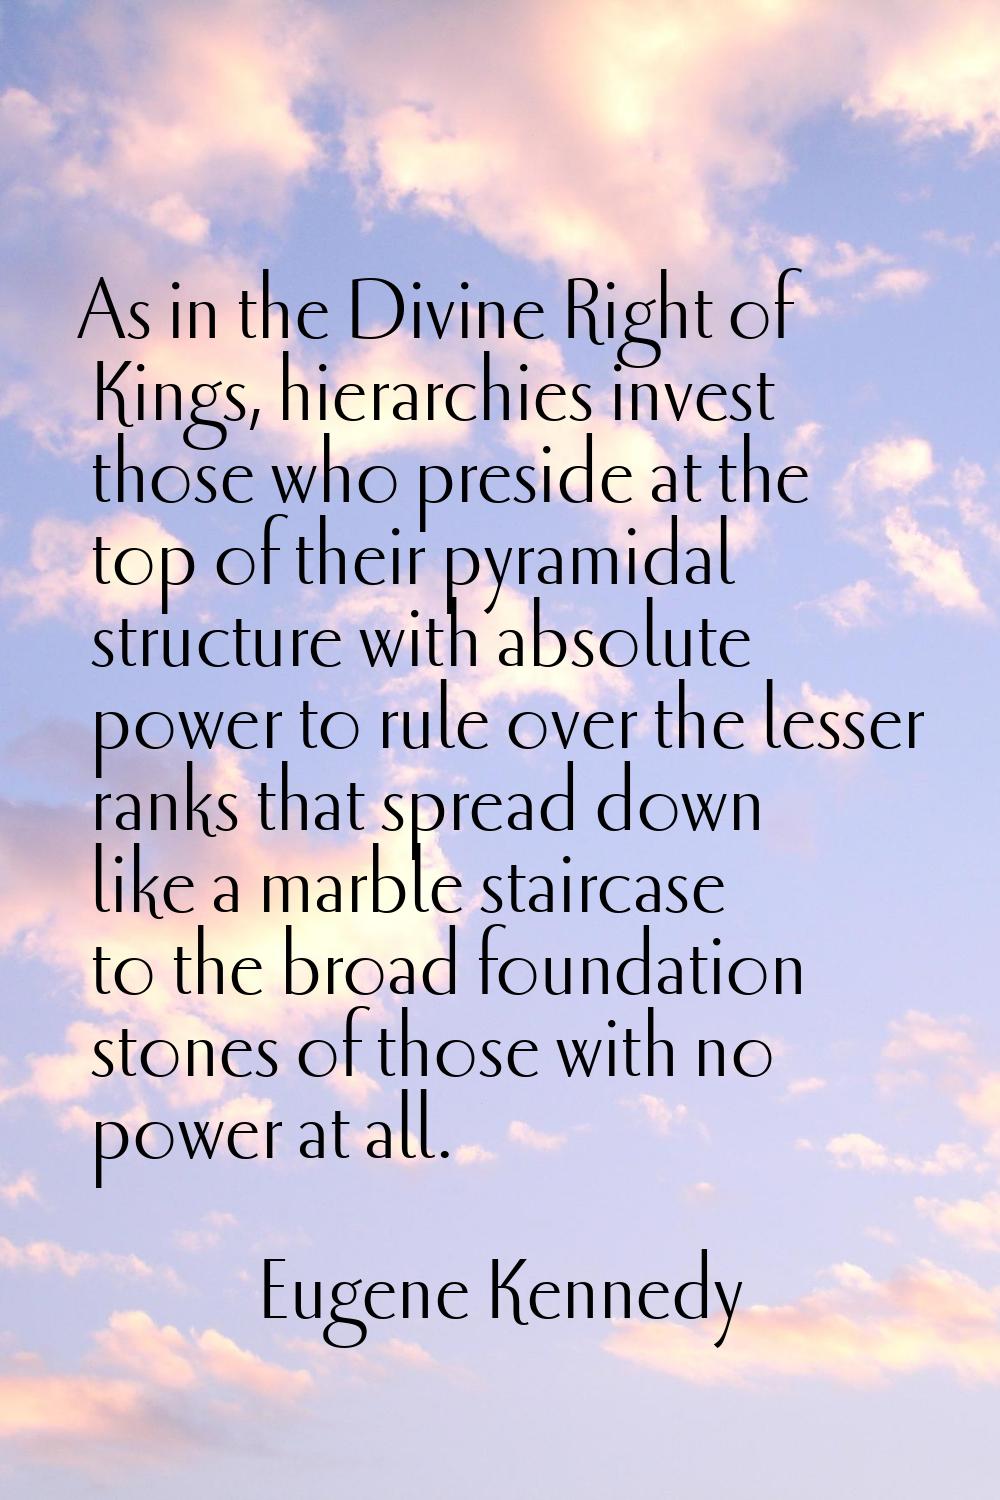 As in the Divine Right of Kings, hierarchies invest those who preside at the top of their pyramidal